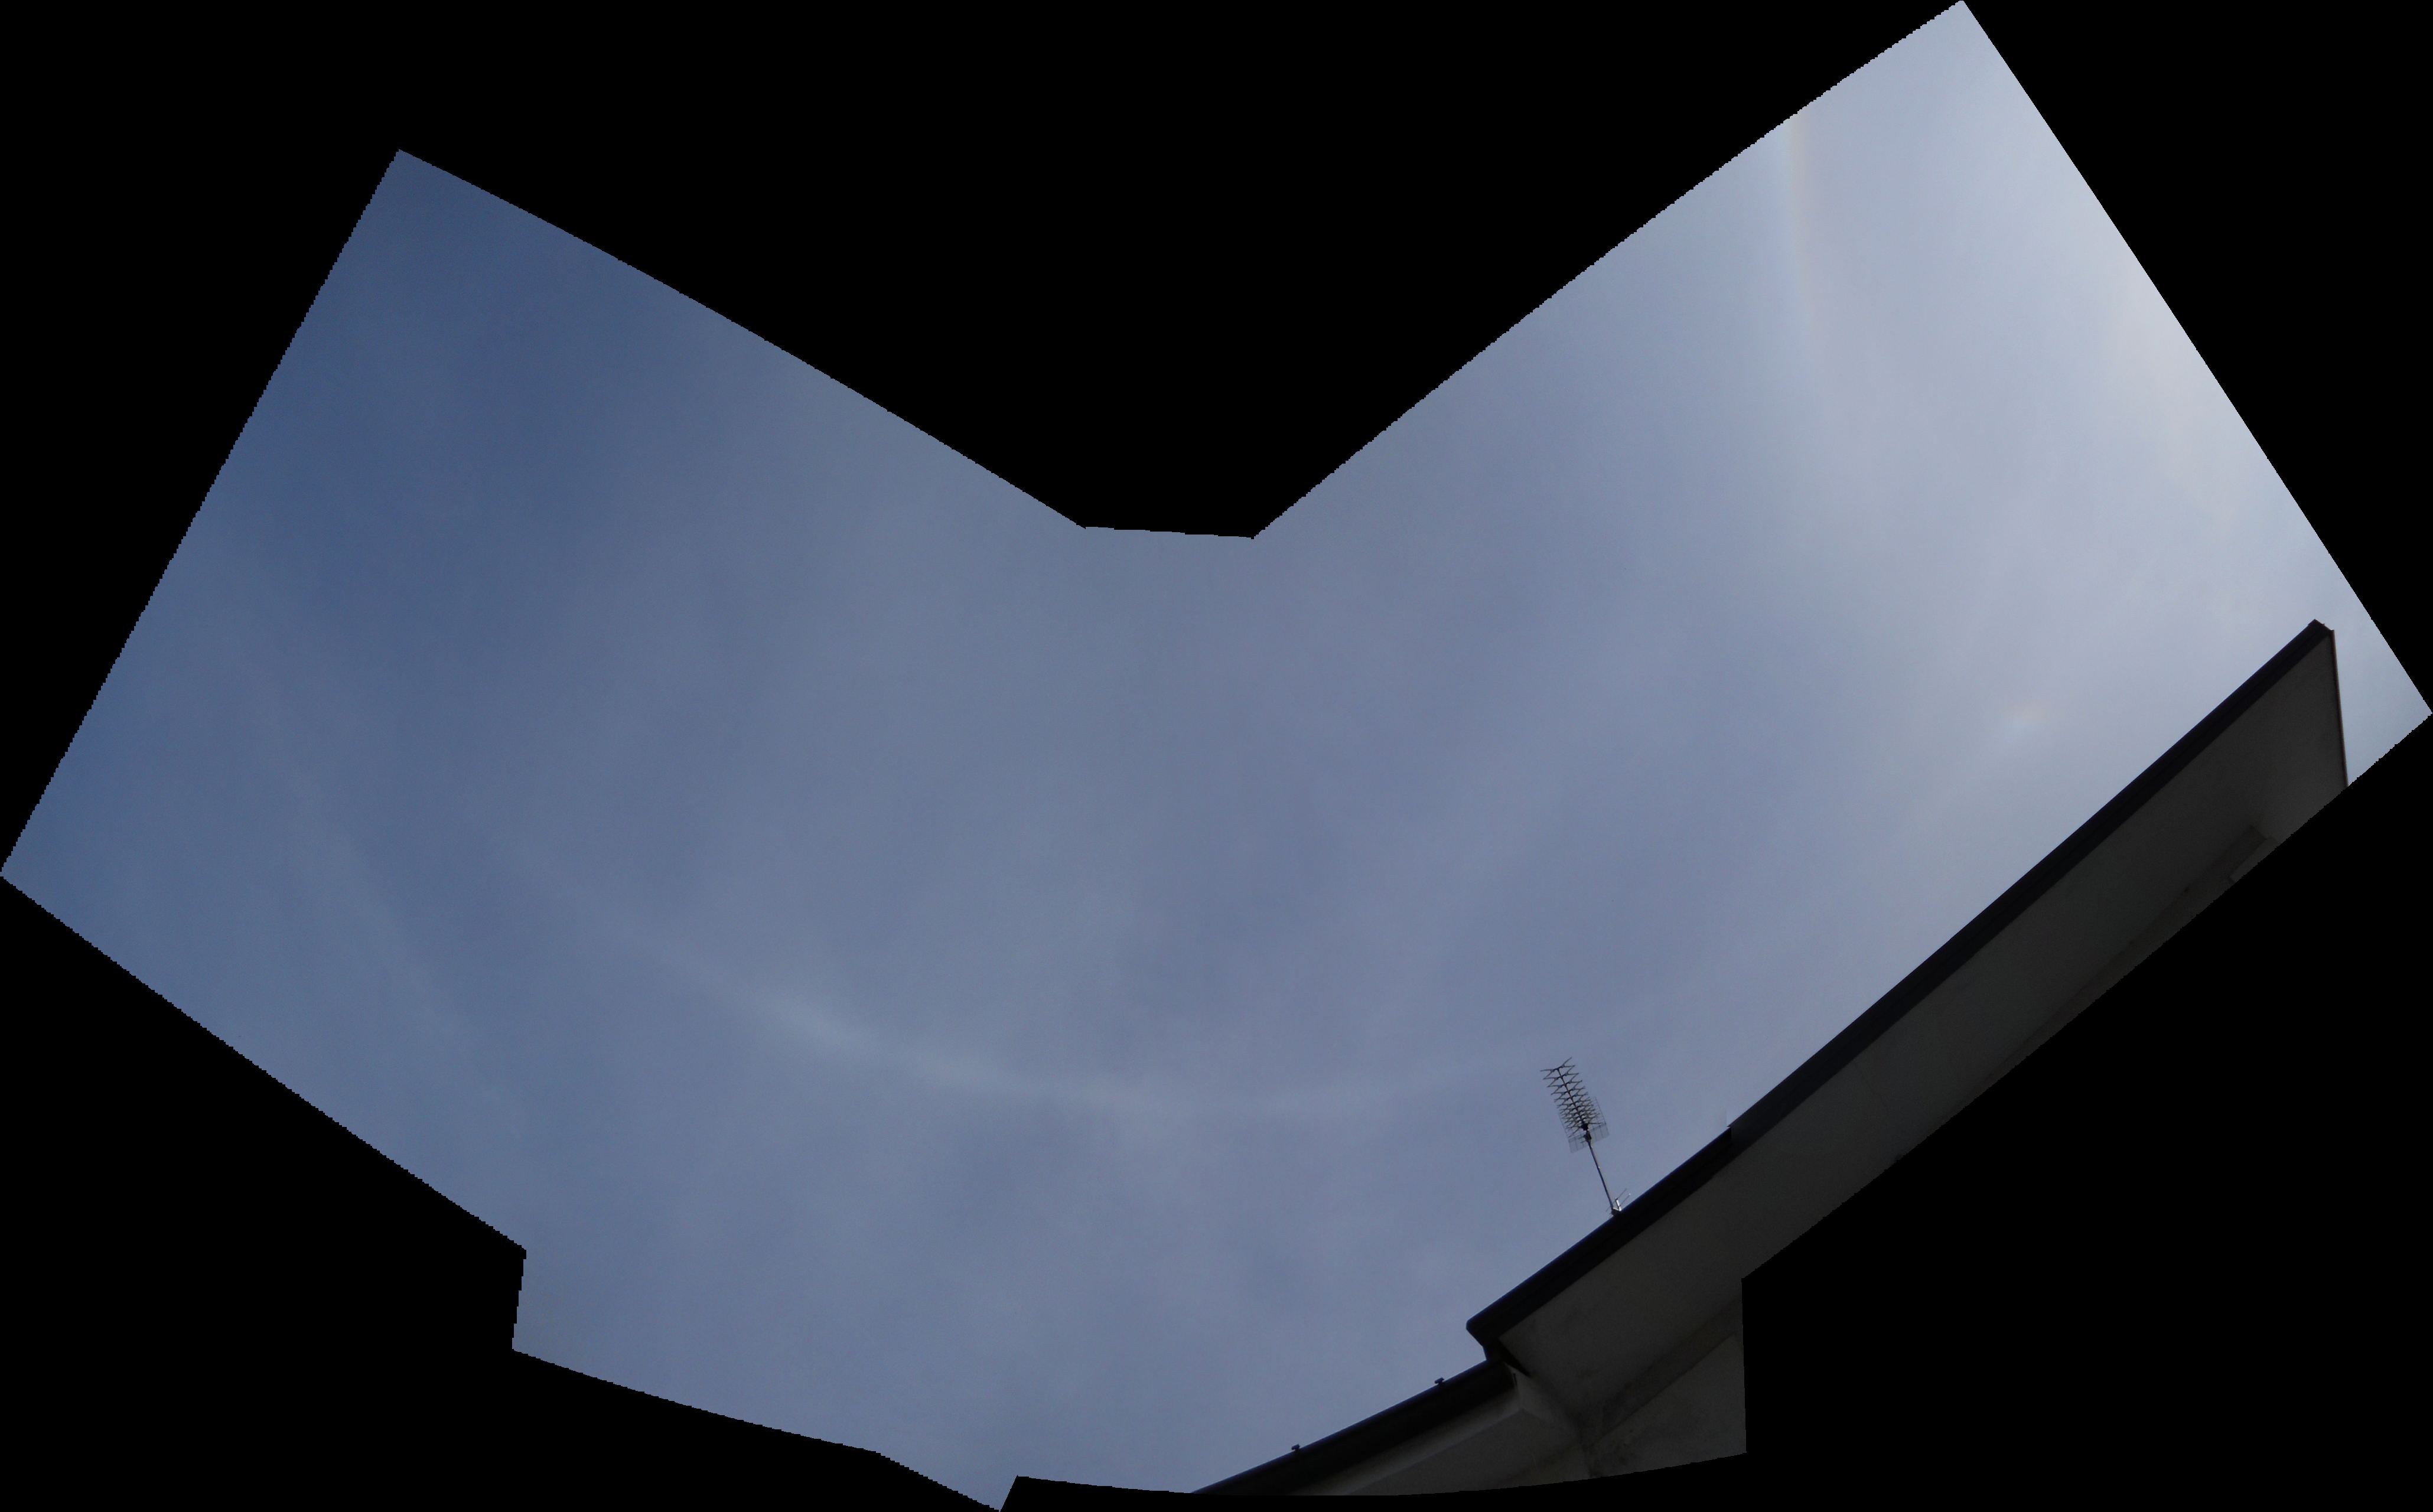 Parelic circle with sundogs: 343 KB; click on the image to enlarge